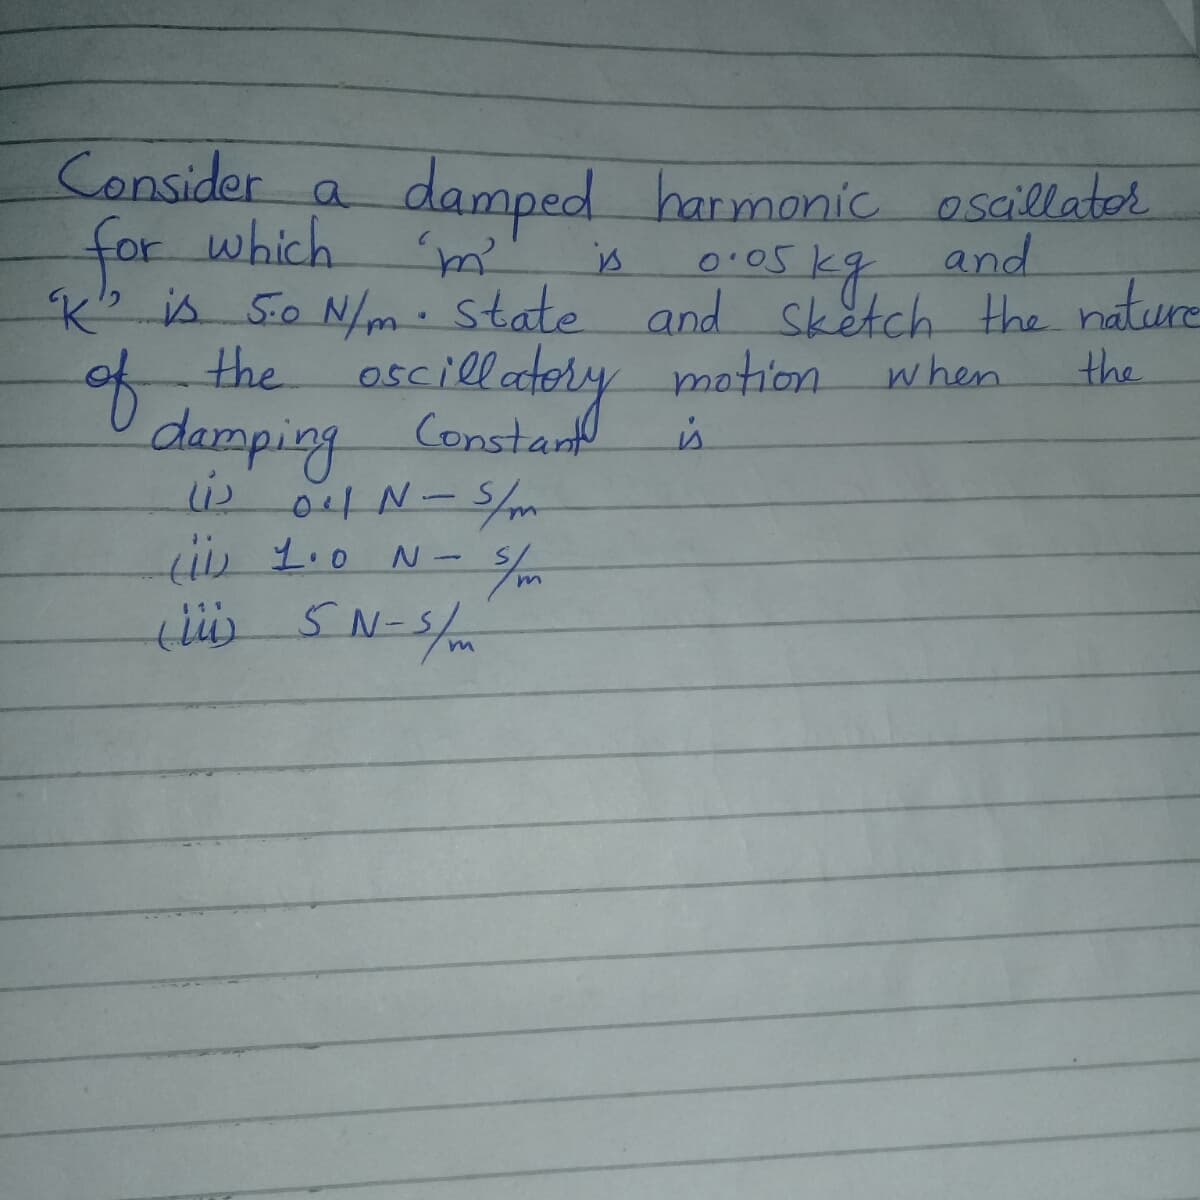 Consider a
for which
Ko is 5o N/m: state and sketch the nature
damped harmonic osaillater
and
is
the oscillately
the
of
yotion when
damping Constat
04N-5/m
i0 1.0 N -
is
